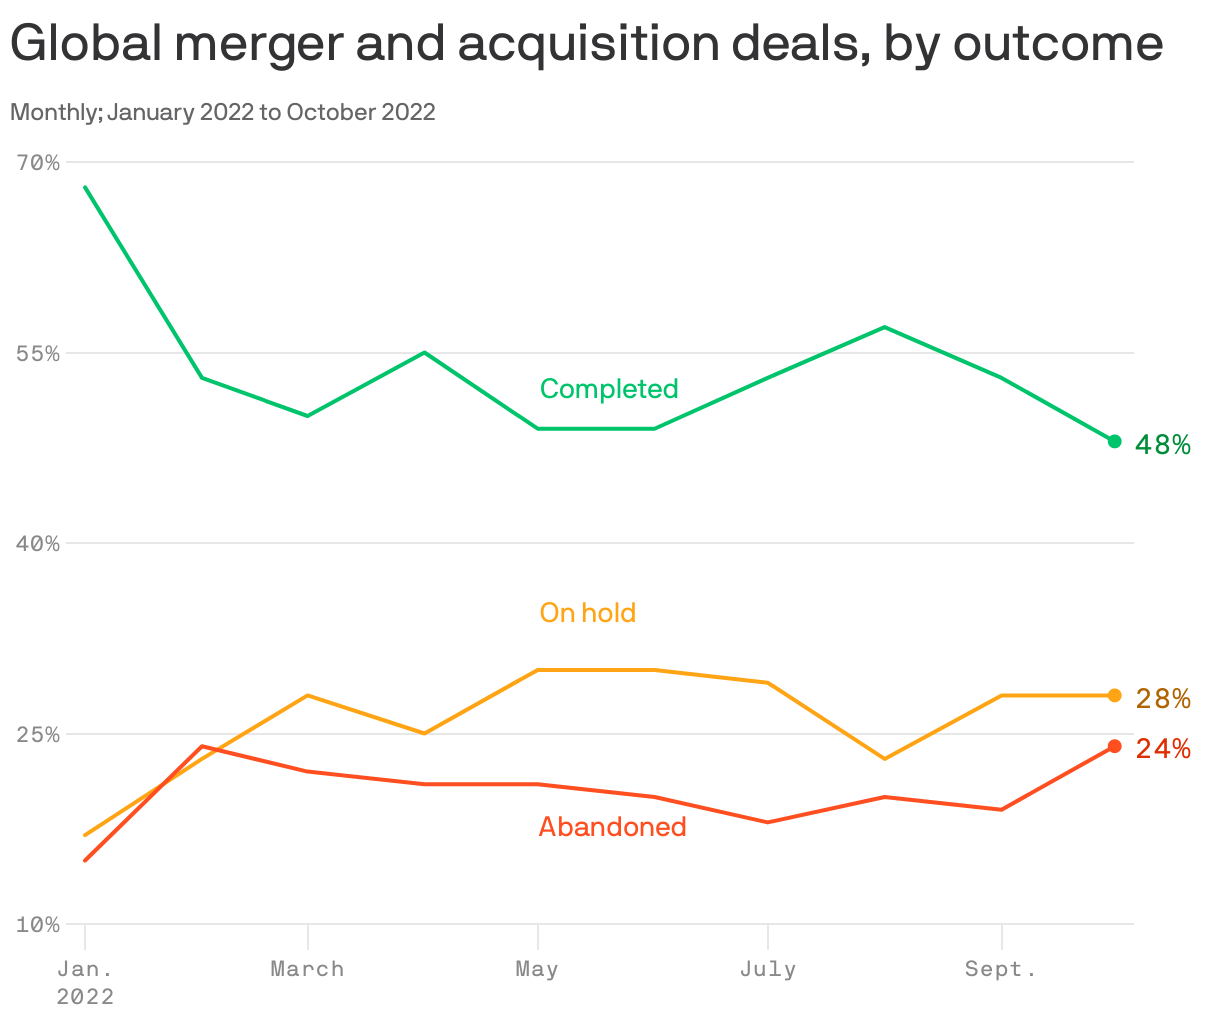 Global merger and acquisition deals, by outcome